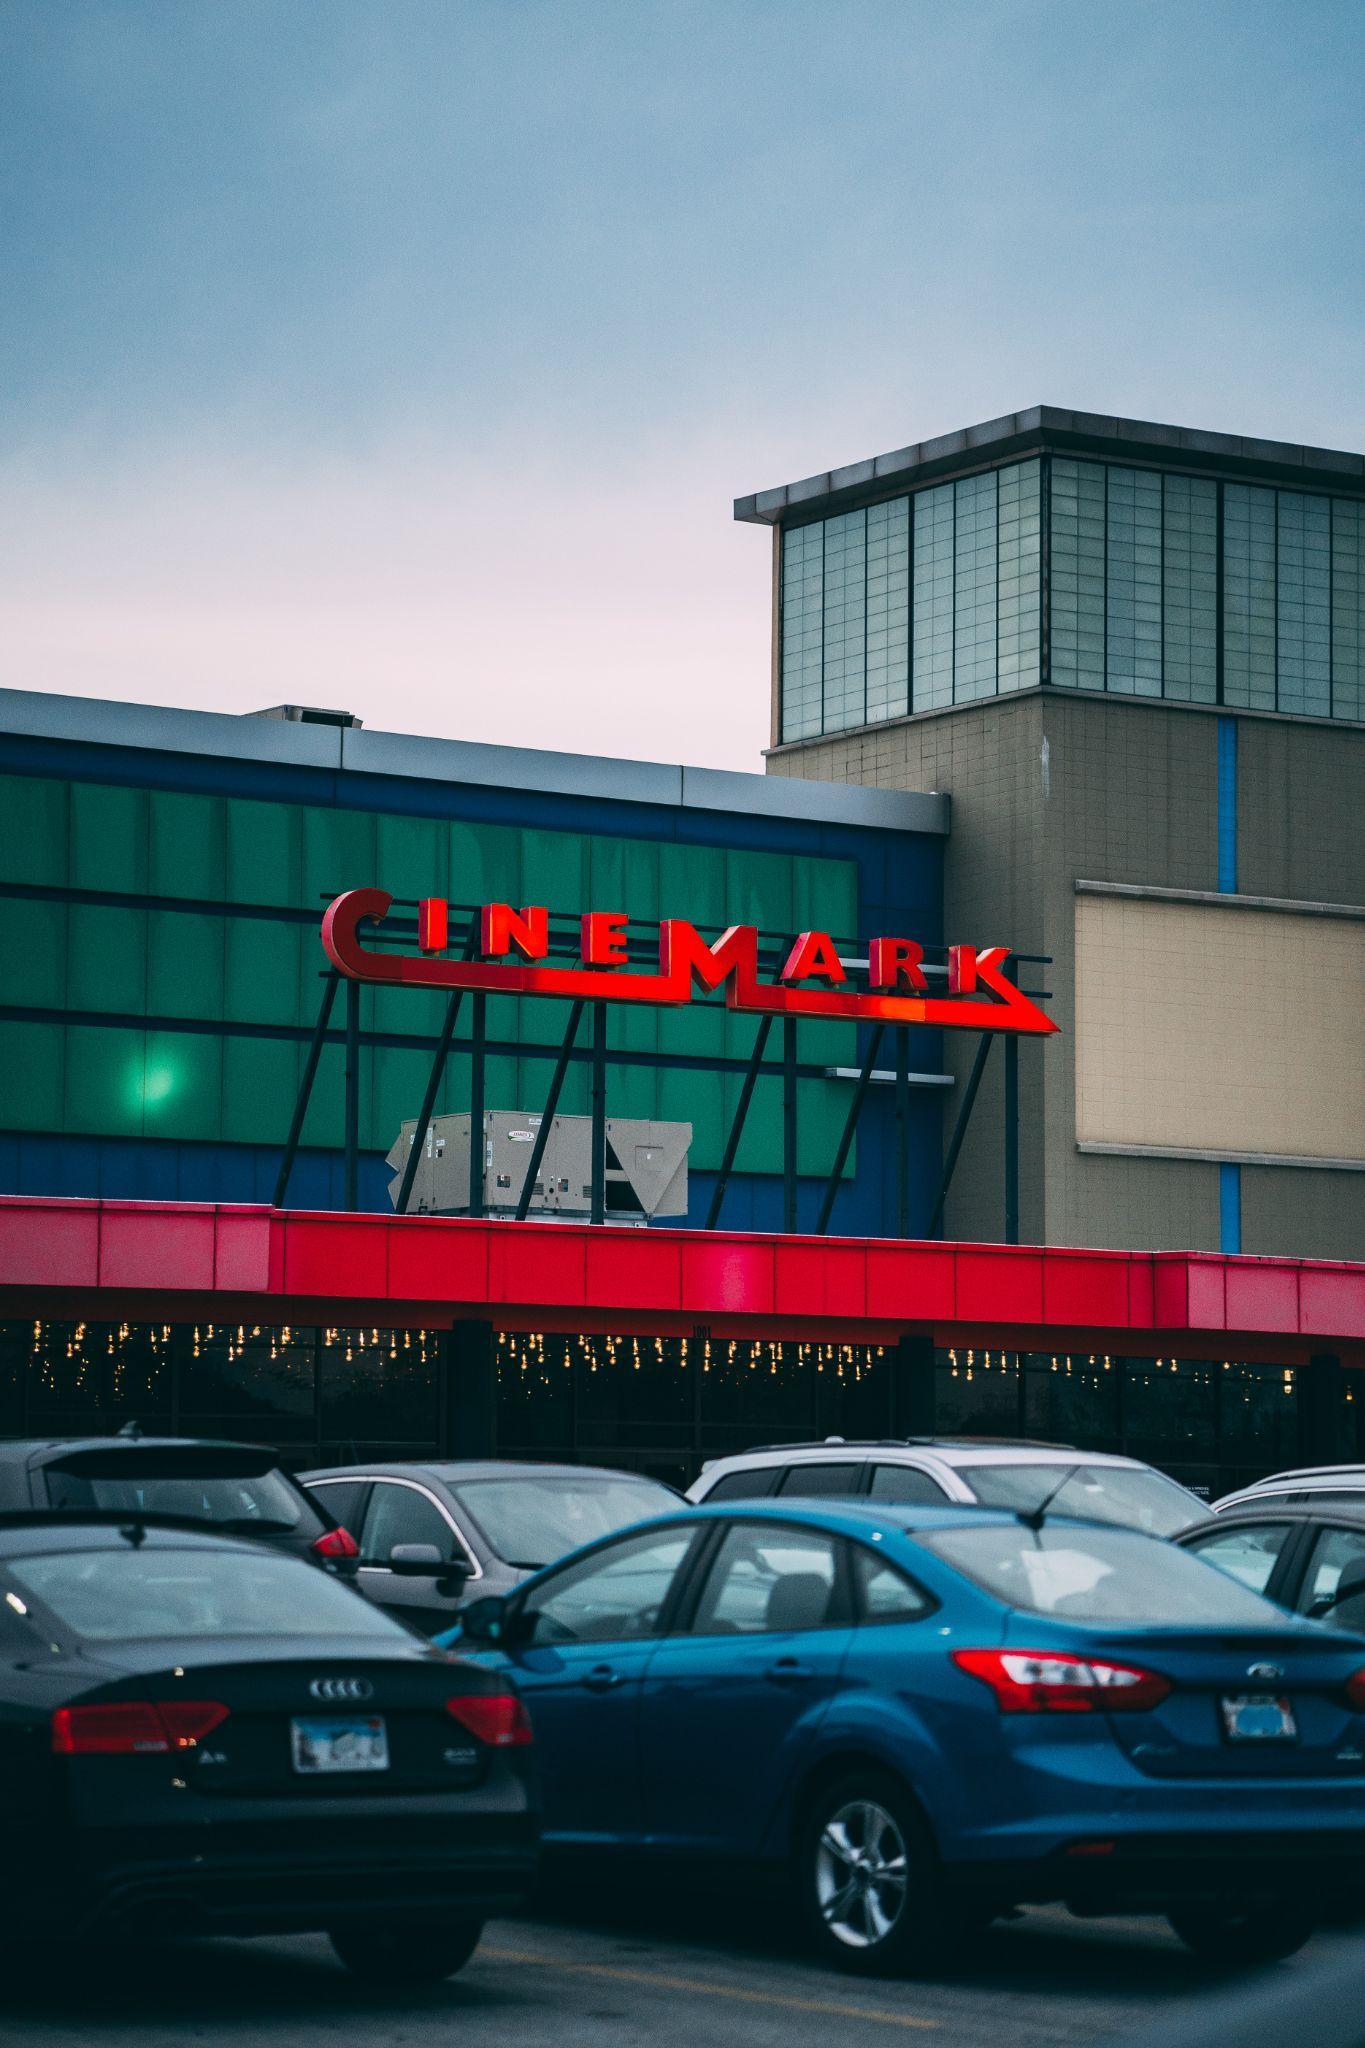 Photo of a movie theater